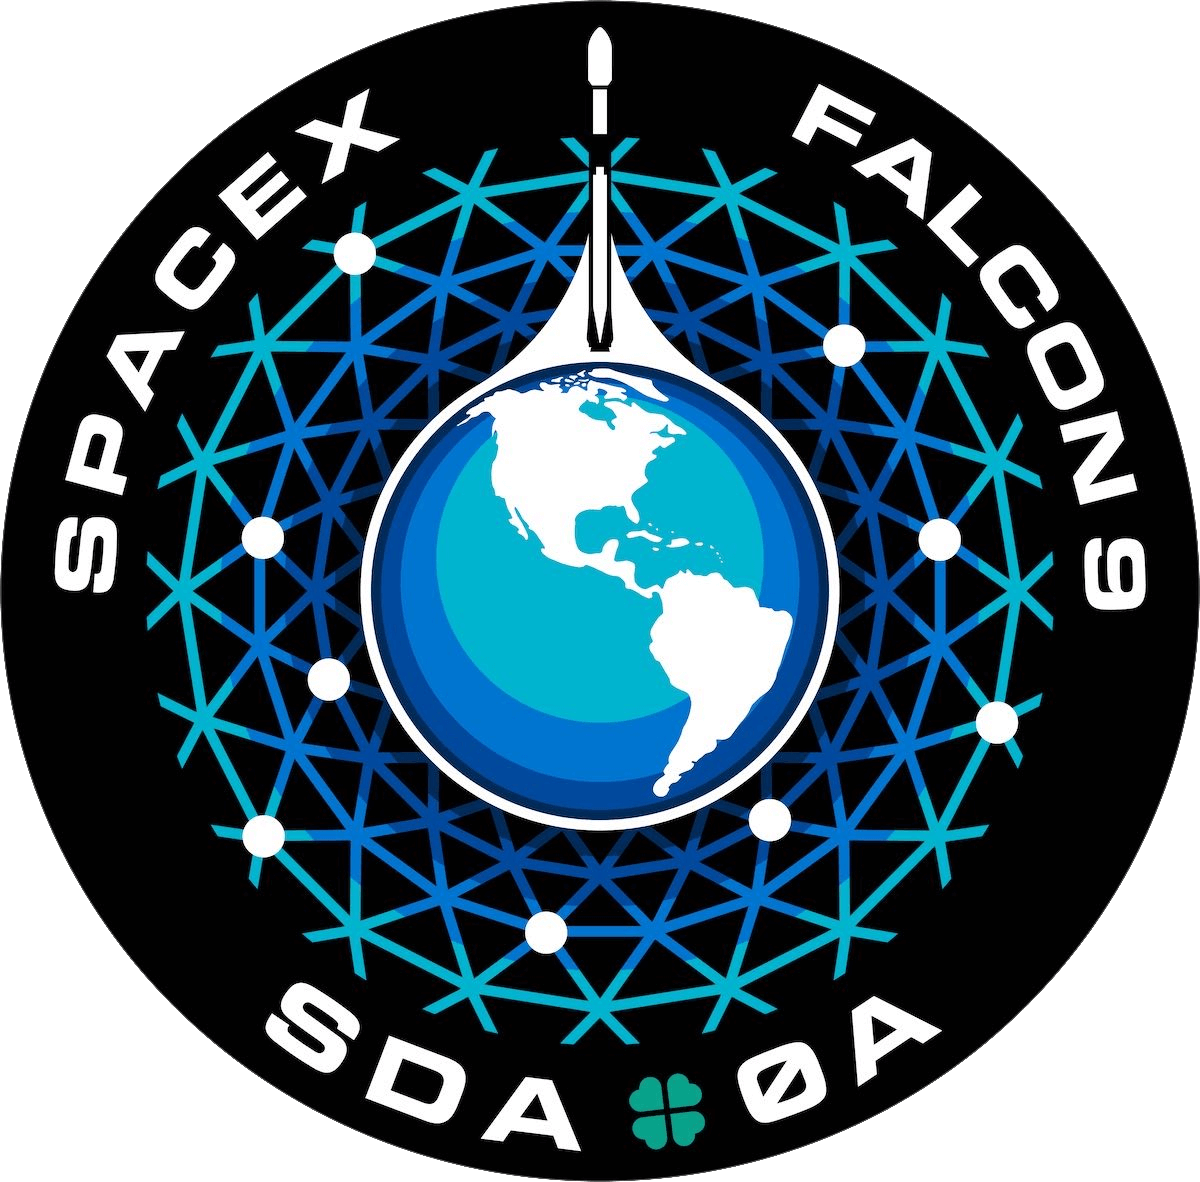 Mission patch for SDA Tranche 0A